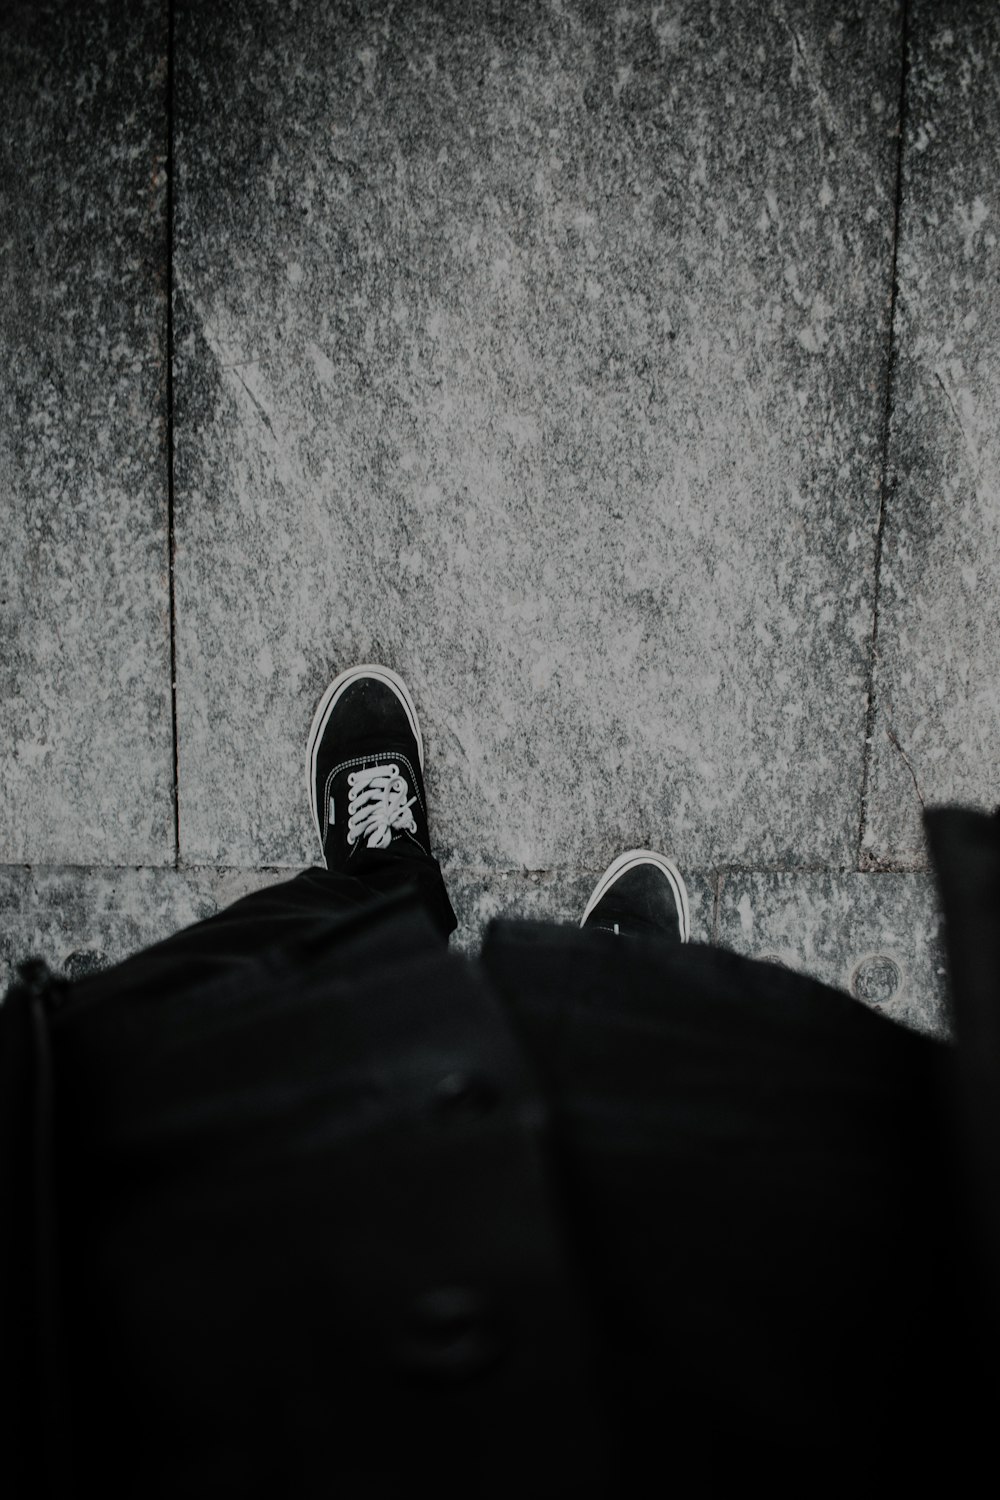 a person standing on a sidewalk with their feet up